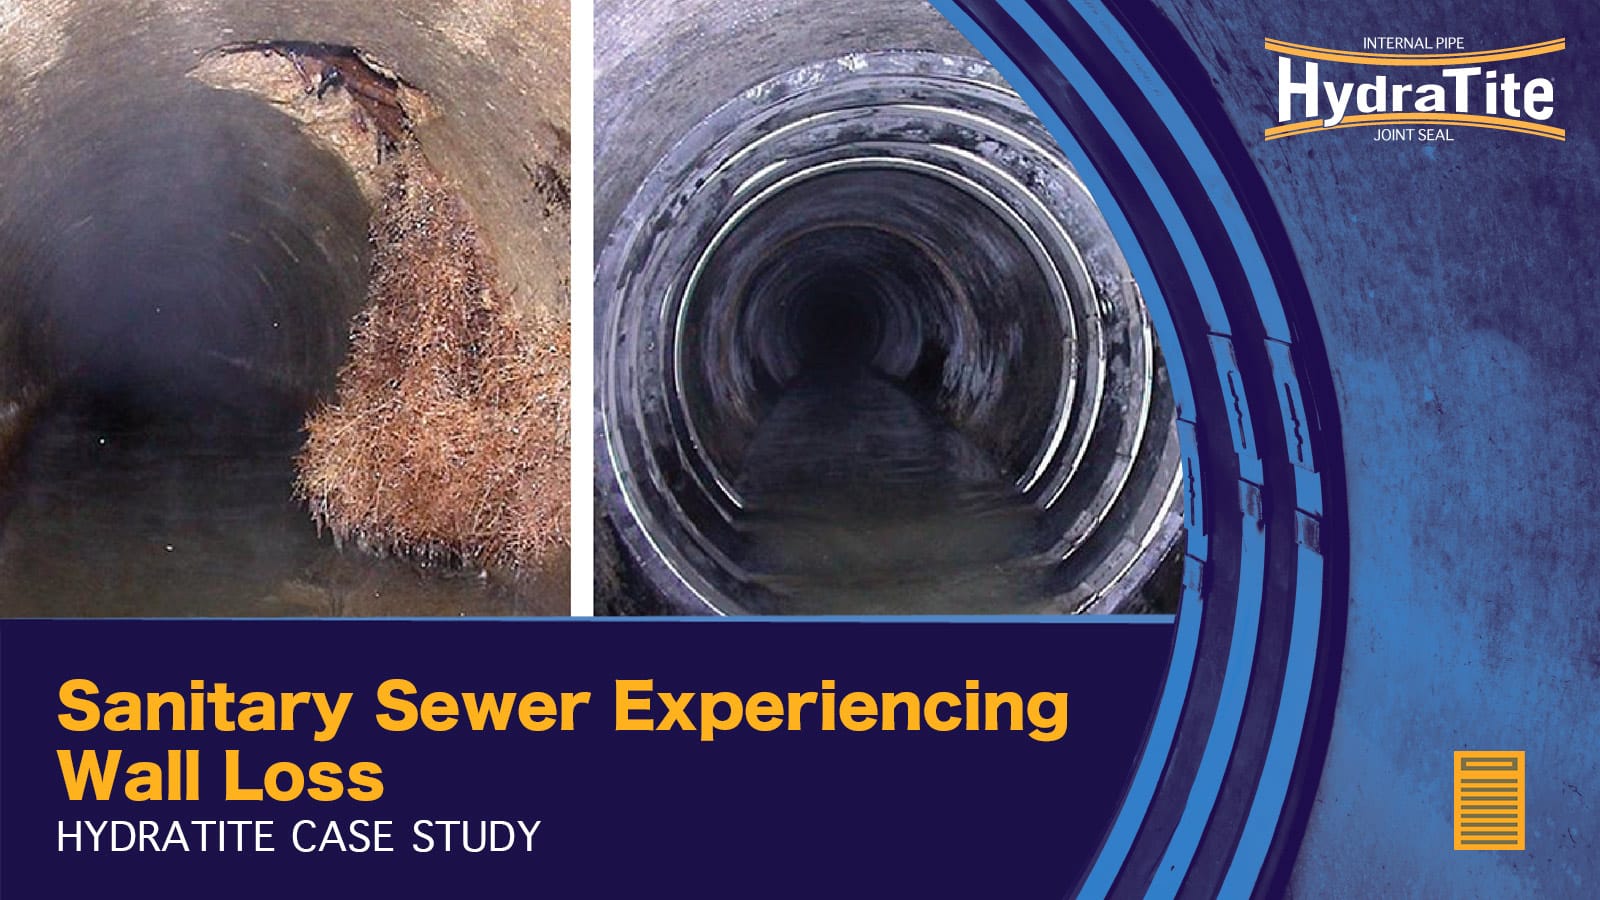 Two pictures of a sanitary sewer, one has wall loss with penetrating roots and seals interlocked over the damaged section of pipe, 'Sanitary Sewer Experiencing Wall Loss, HydraTite Case Study'